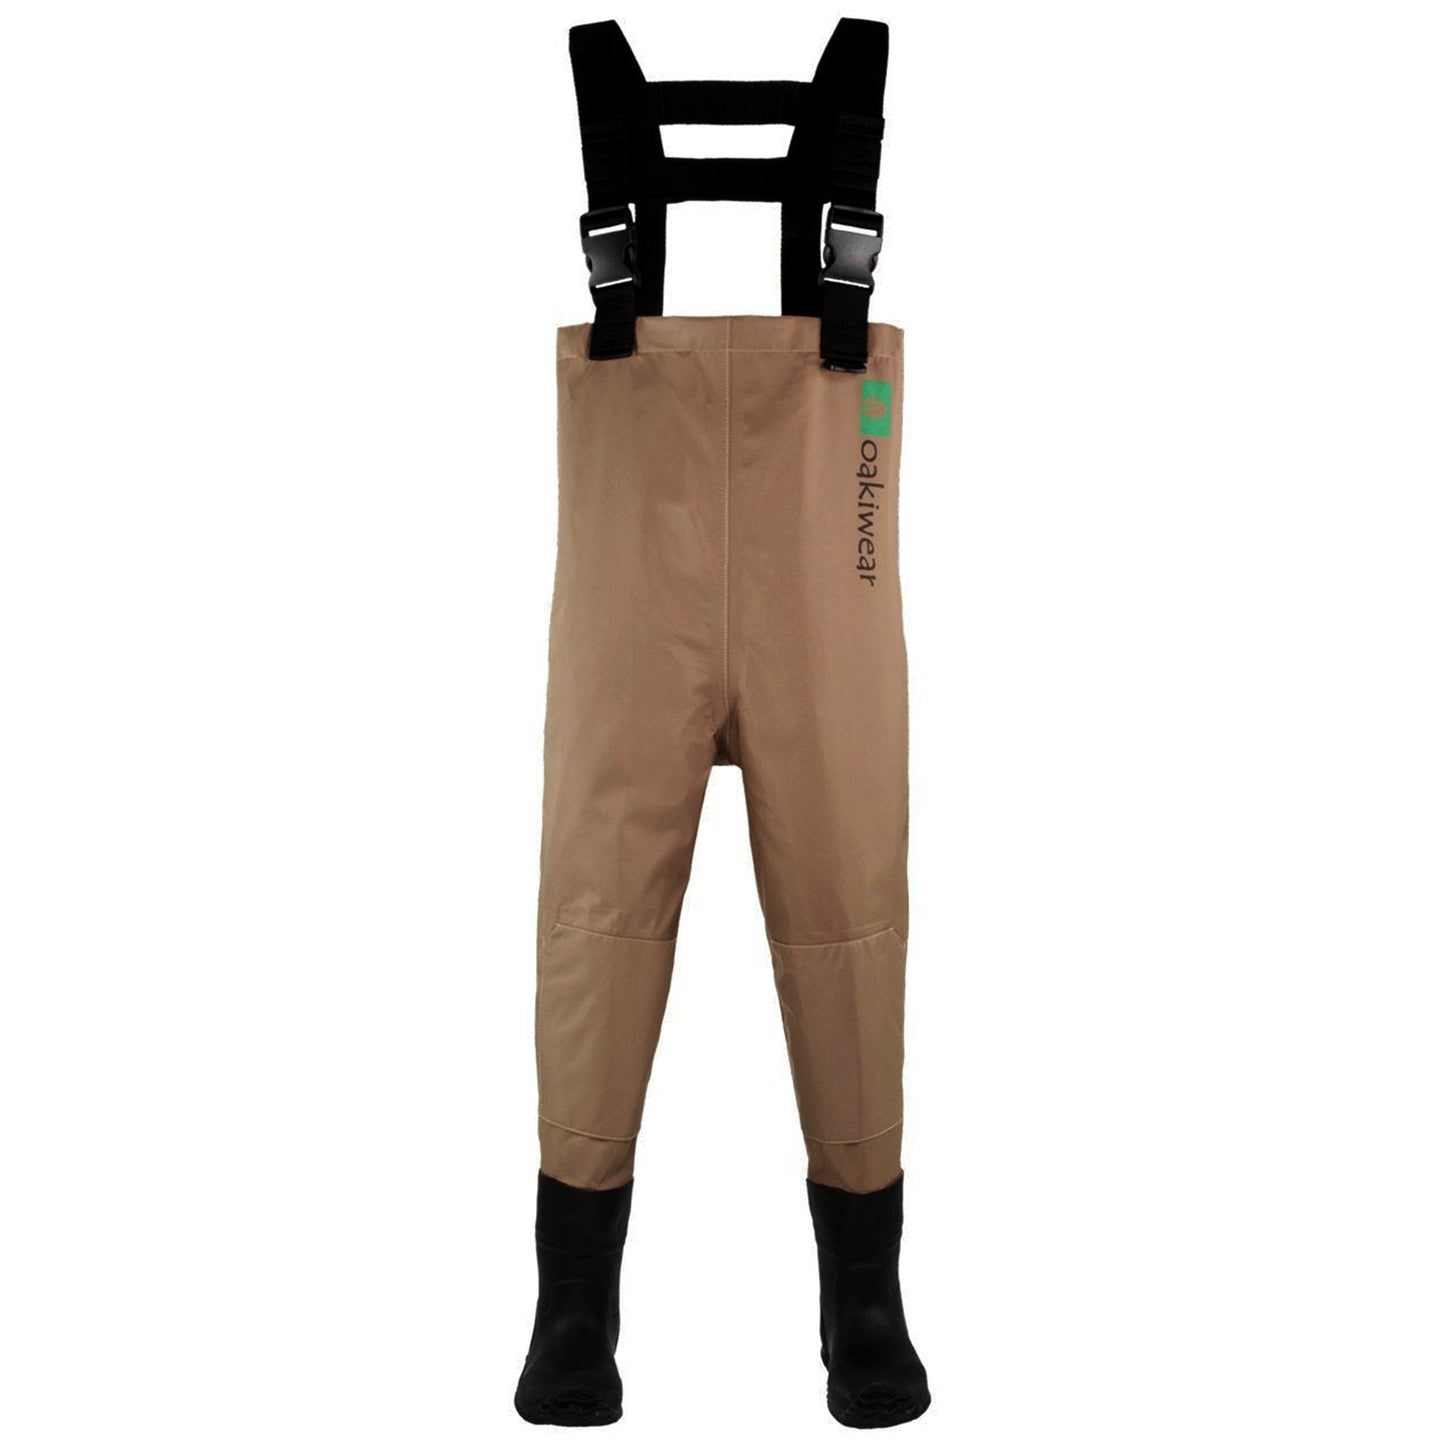 Oakiwear Breathable Youth Kids Chest Waders Children Toddler, Tan